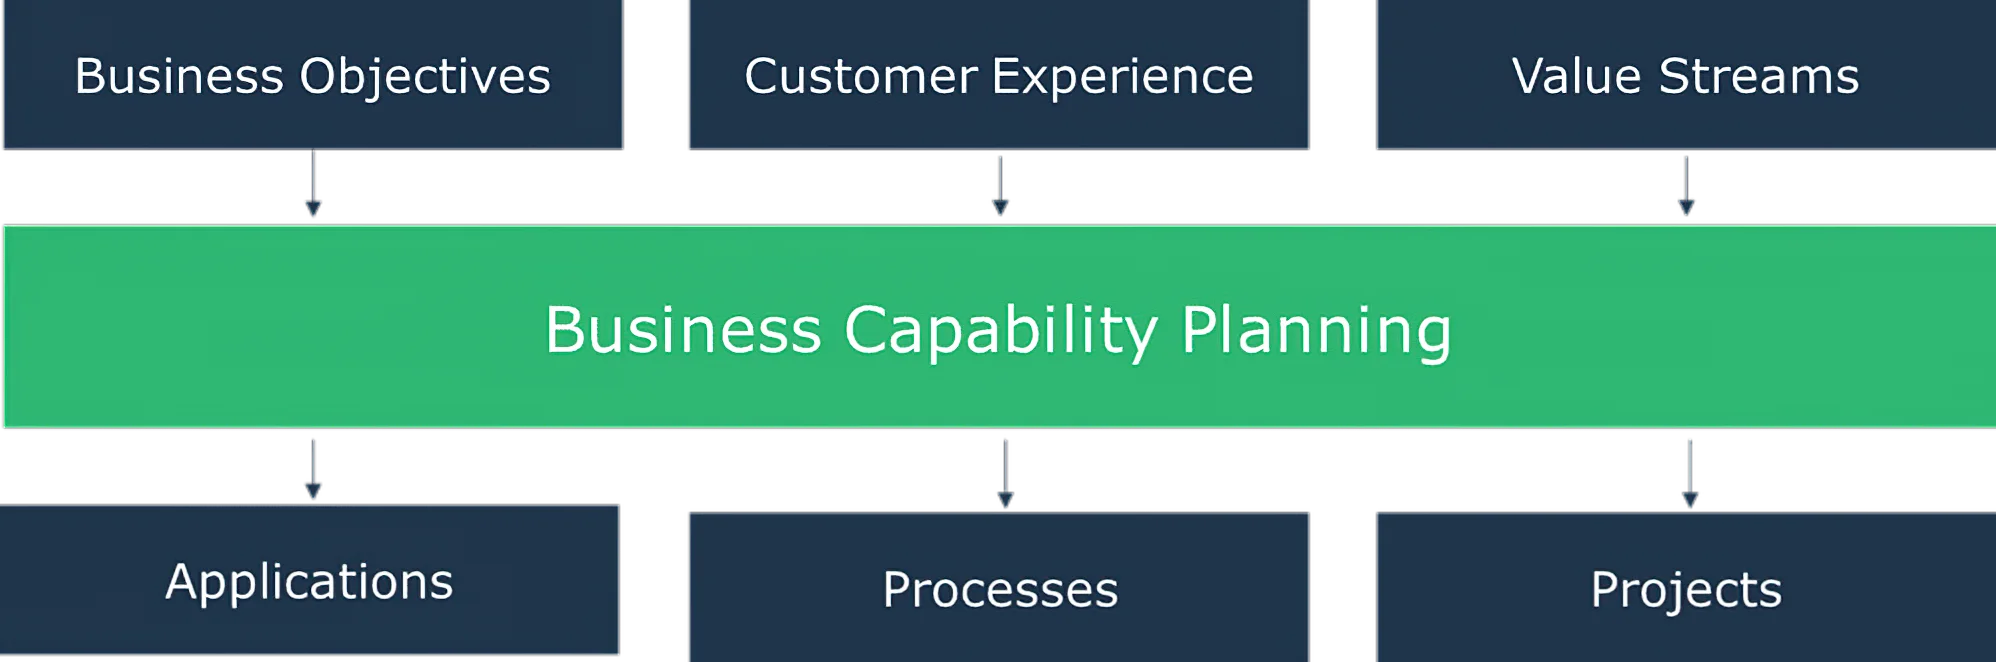 Business Capability Planning